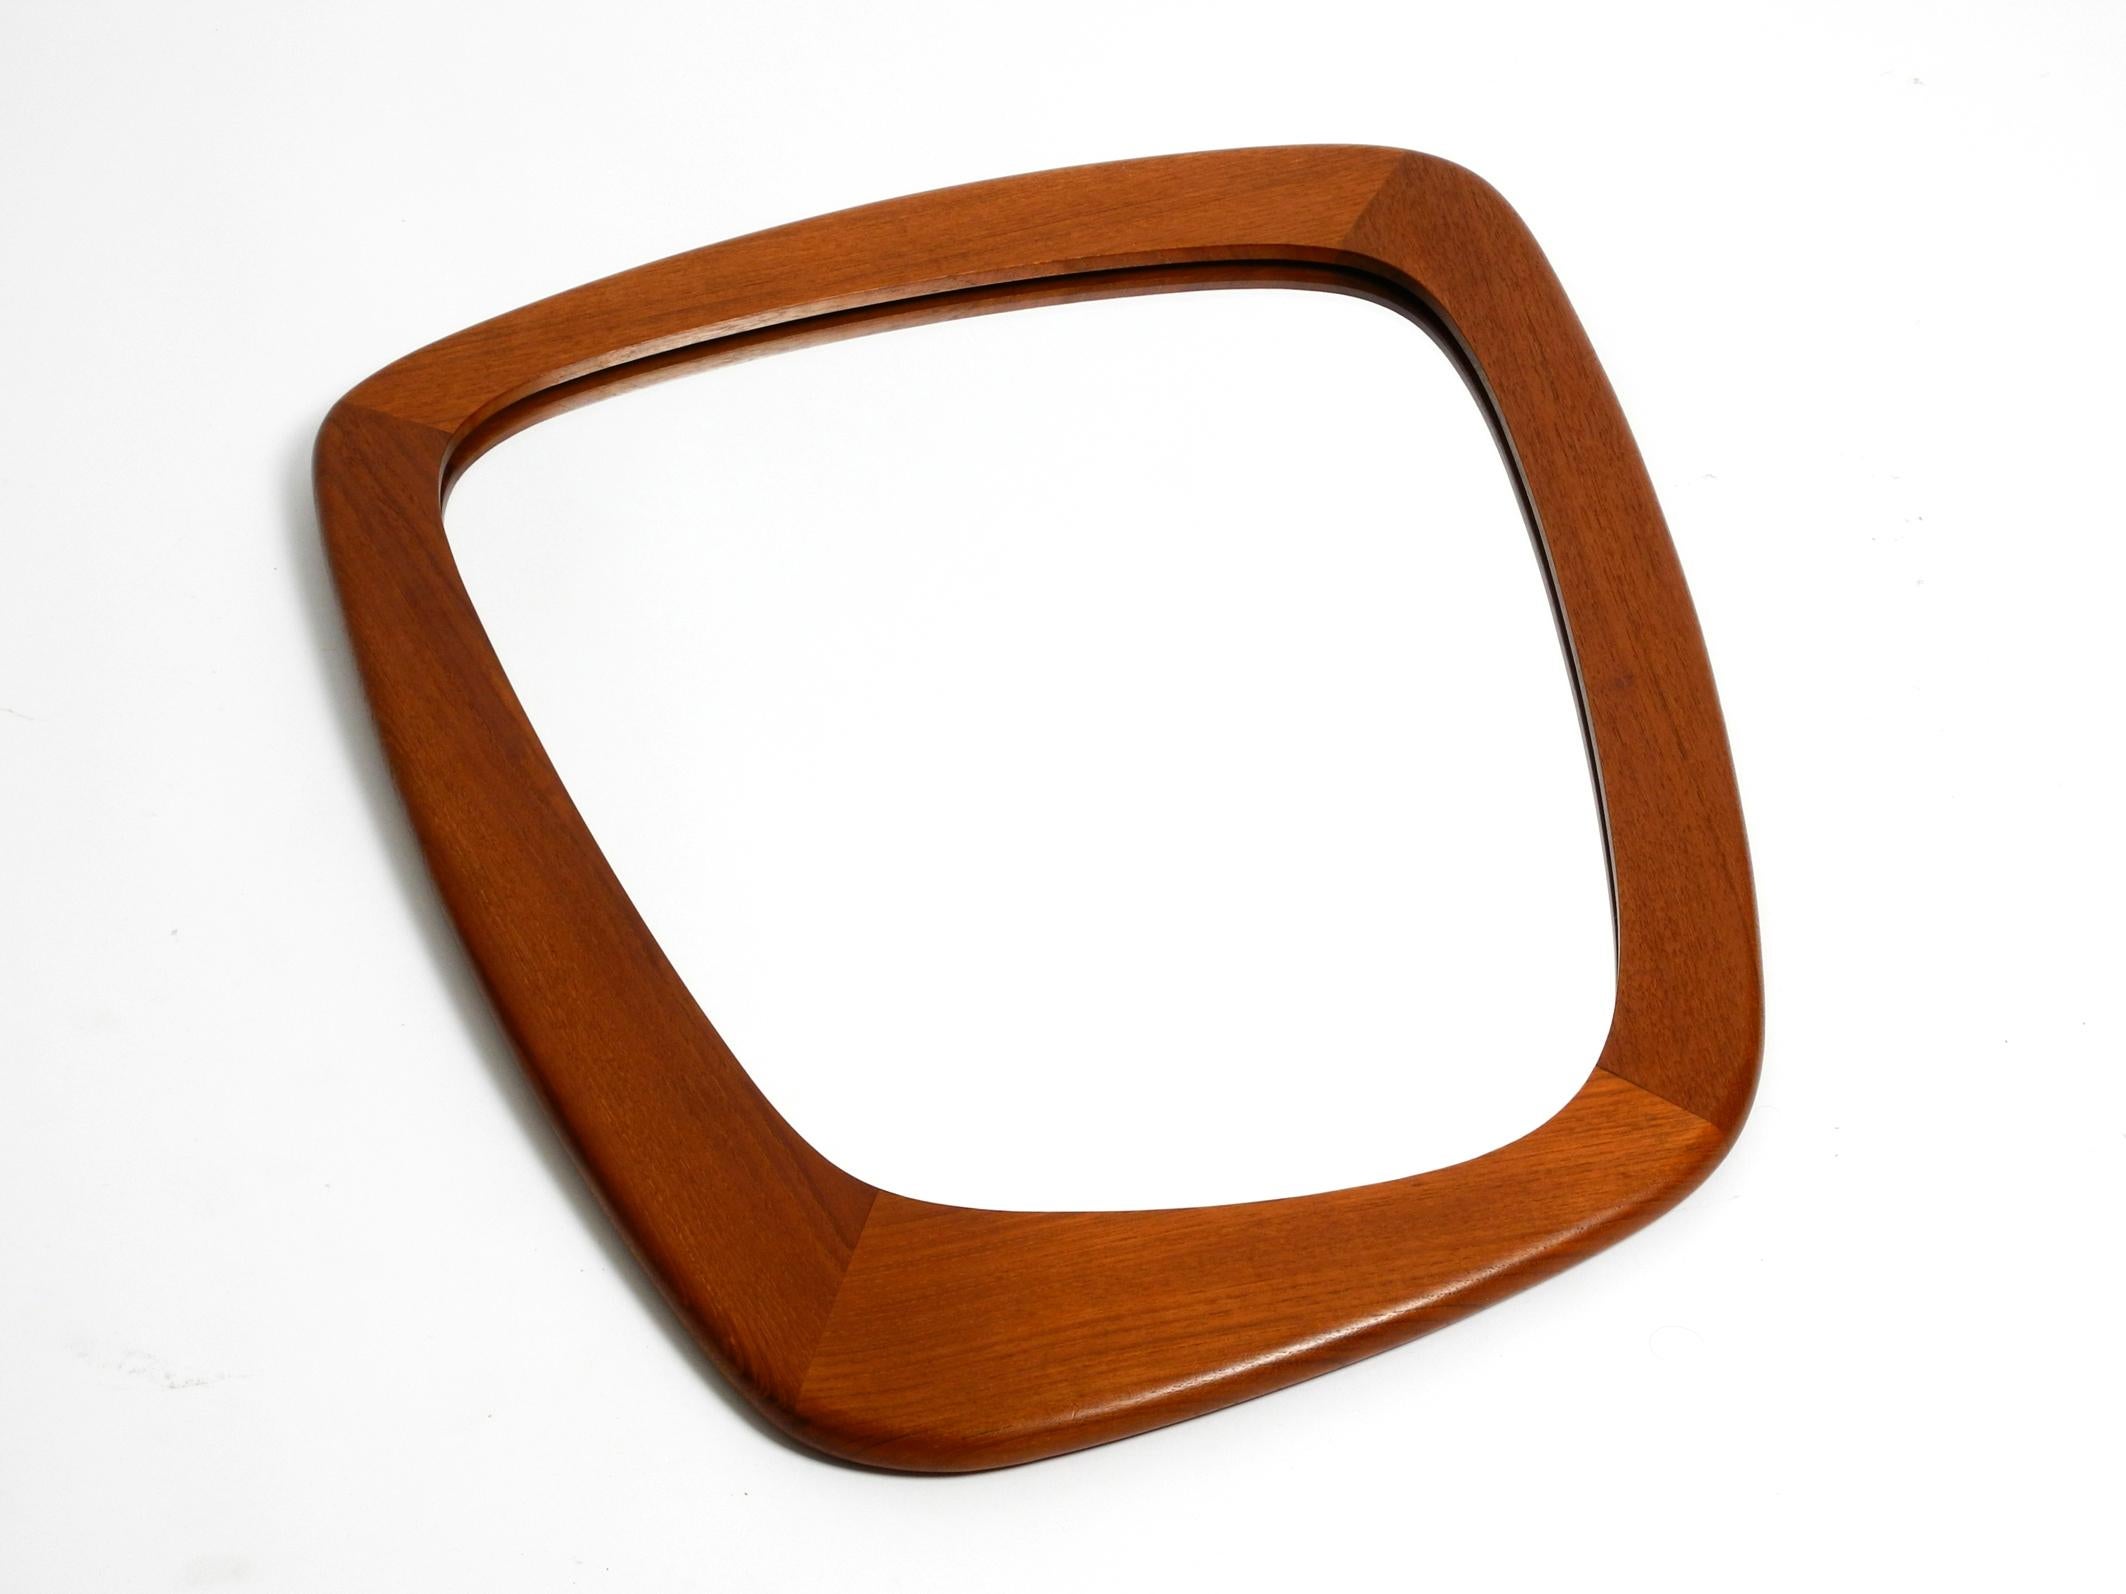 Beautiful rare mid-century teak wall mirror.
Frame and mirror are built asymmetrically.
High-quality workmanship in a minimalist, typical 1950s design.
Manufacturer is Munich Zier-Form. Made in Germany.
100% original condition. In almost new,